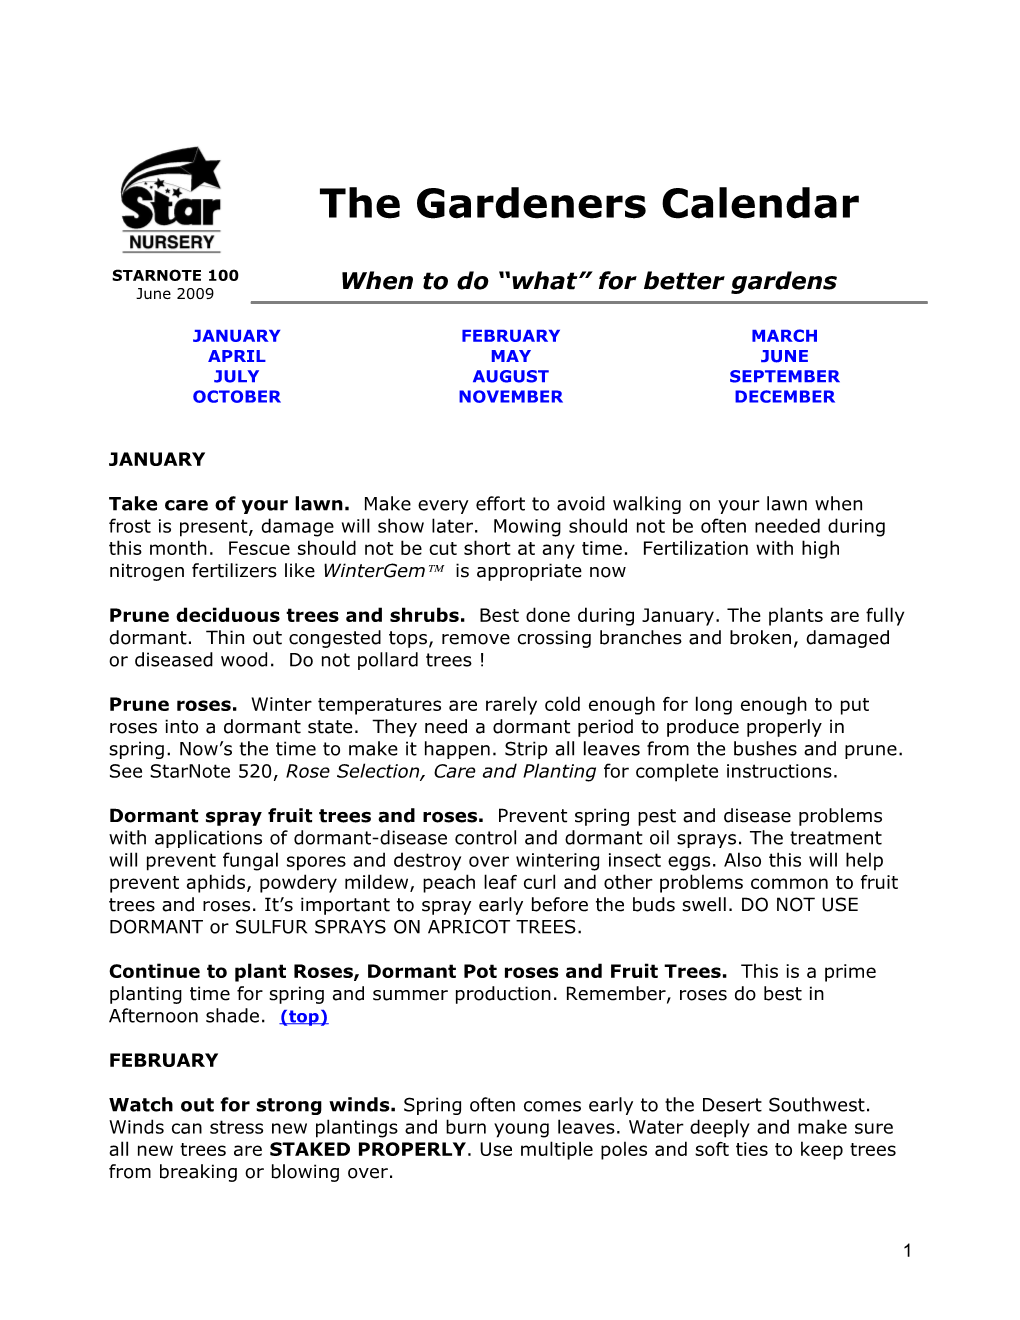 When to Do What for Better Gardens